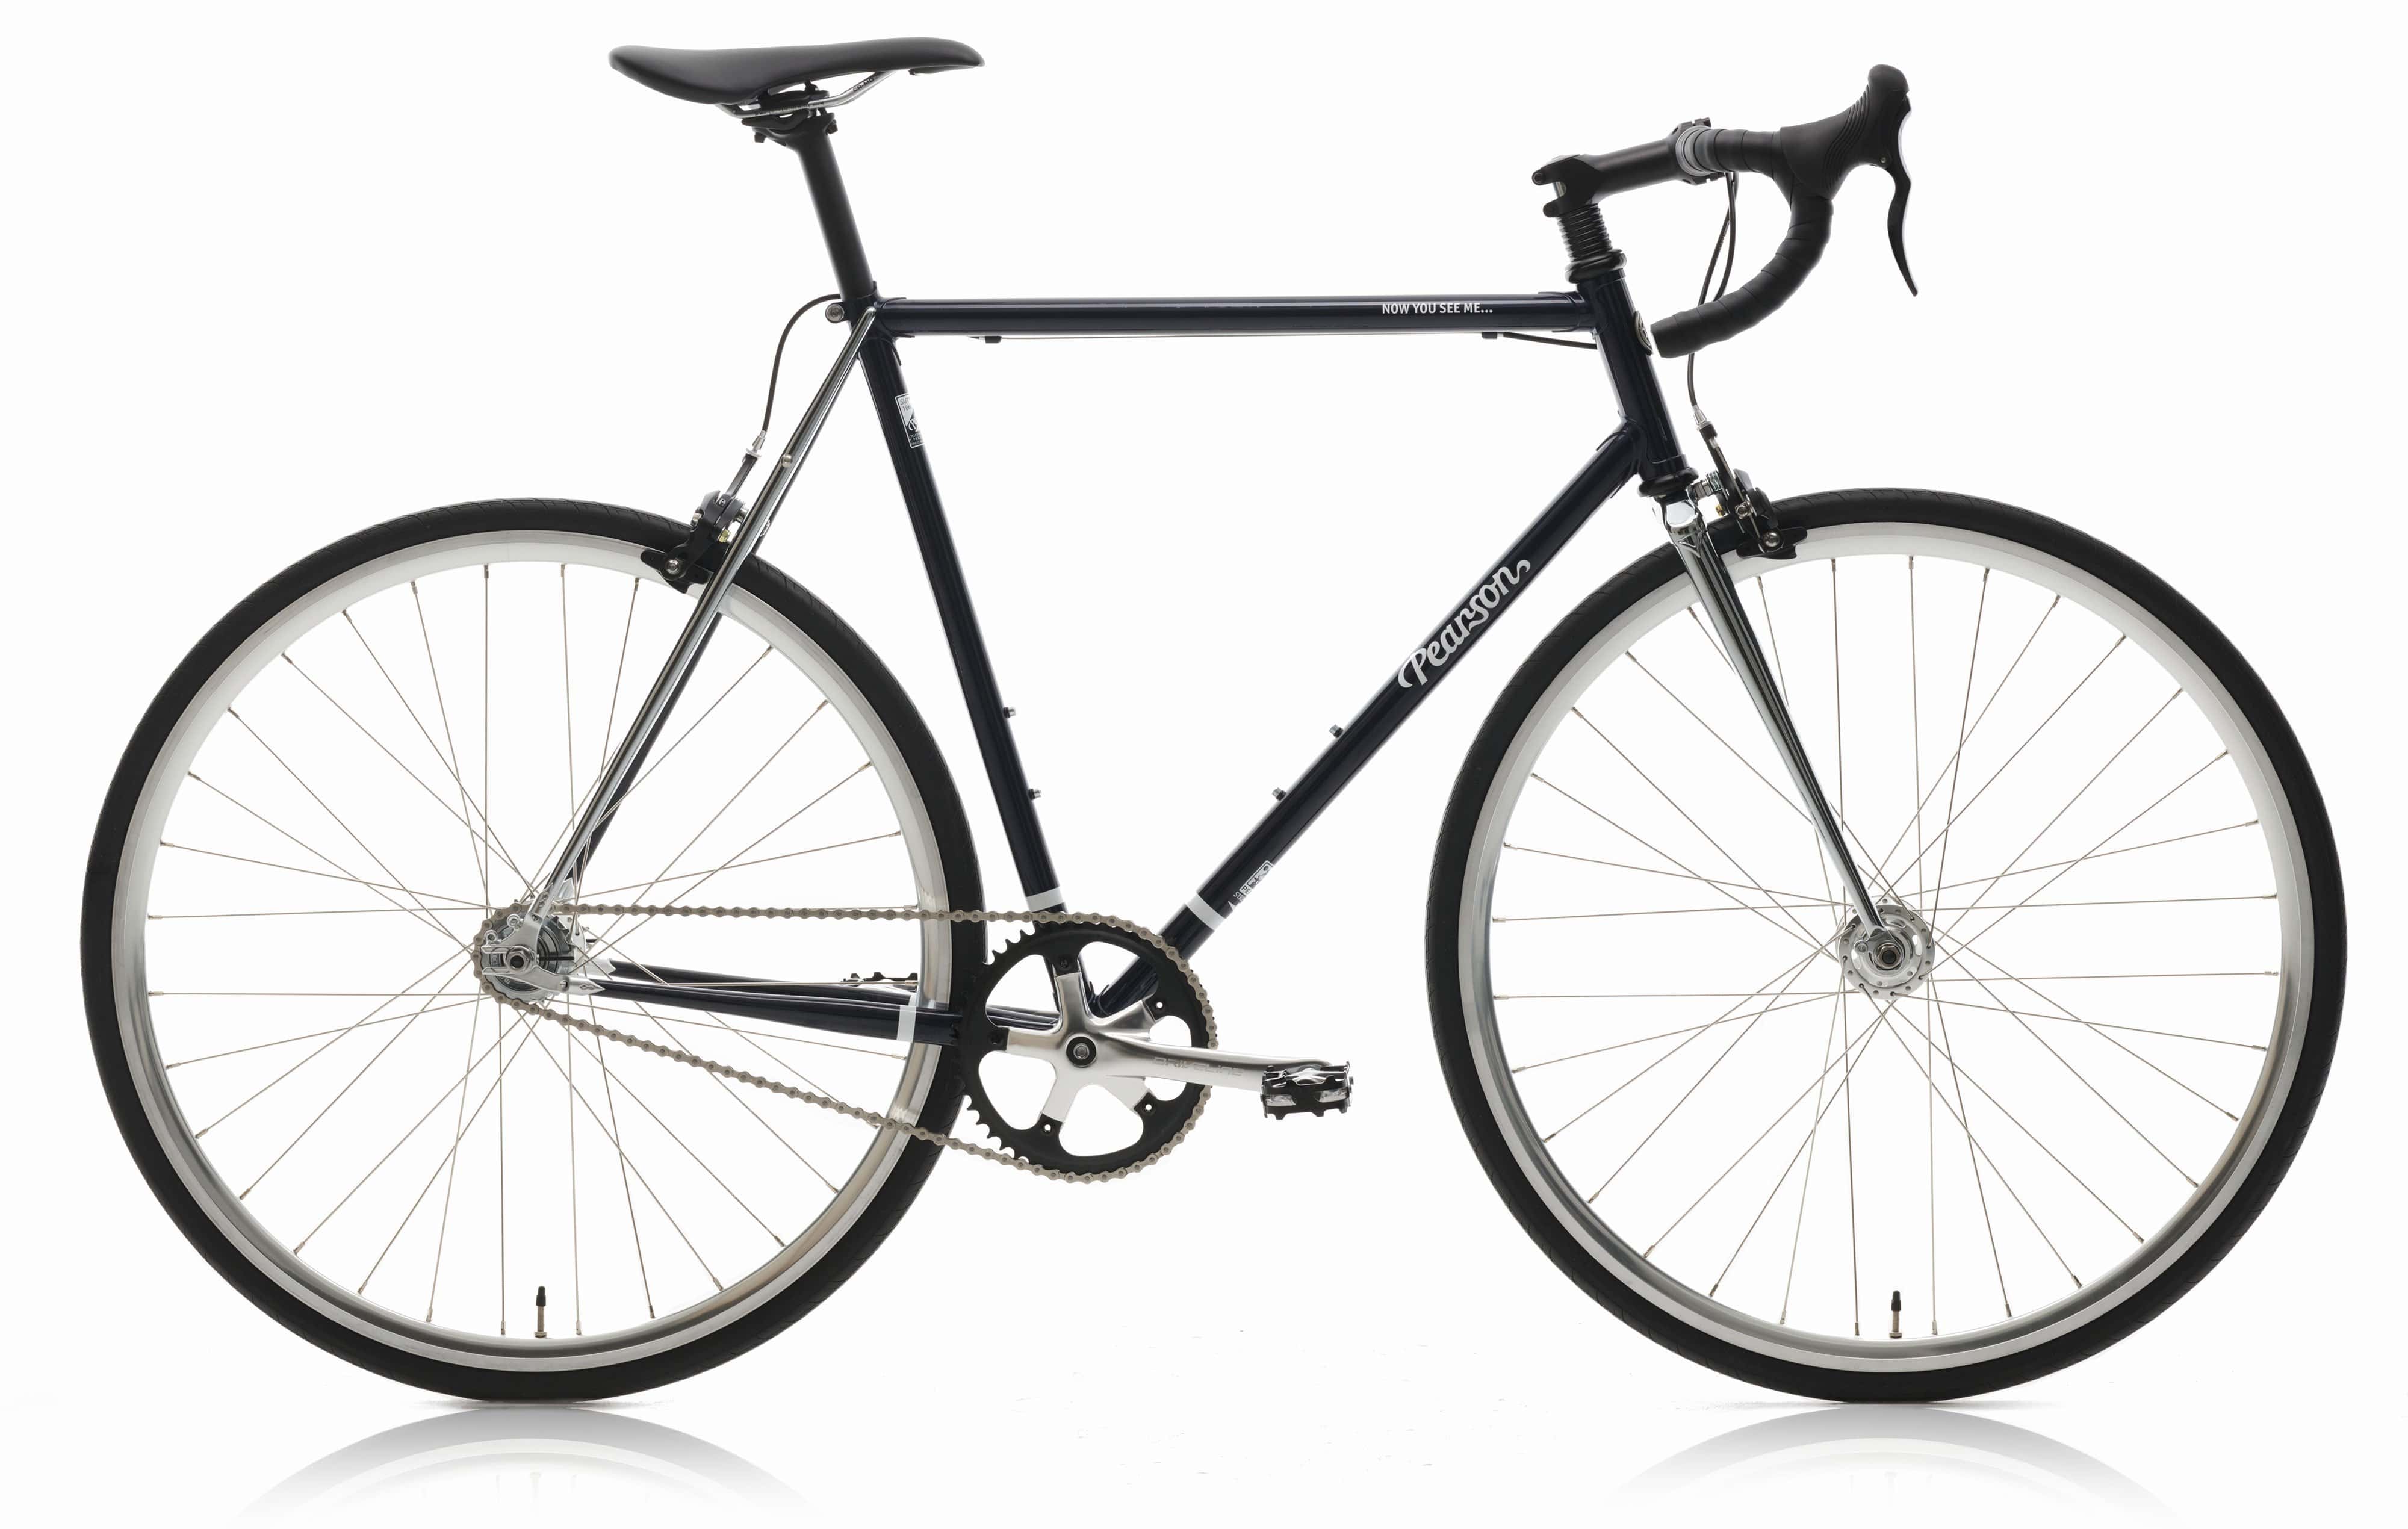 Pcs  Now You See Me - Steel Single Speed Bike  Continental Gator Hardshell 28mm / With Mudguards / Small